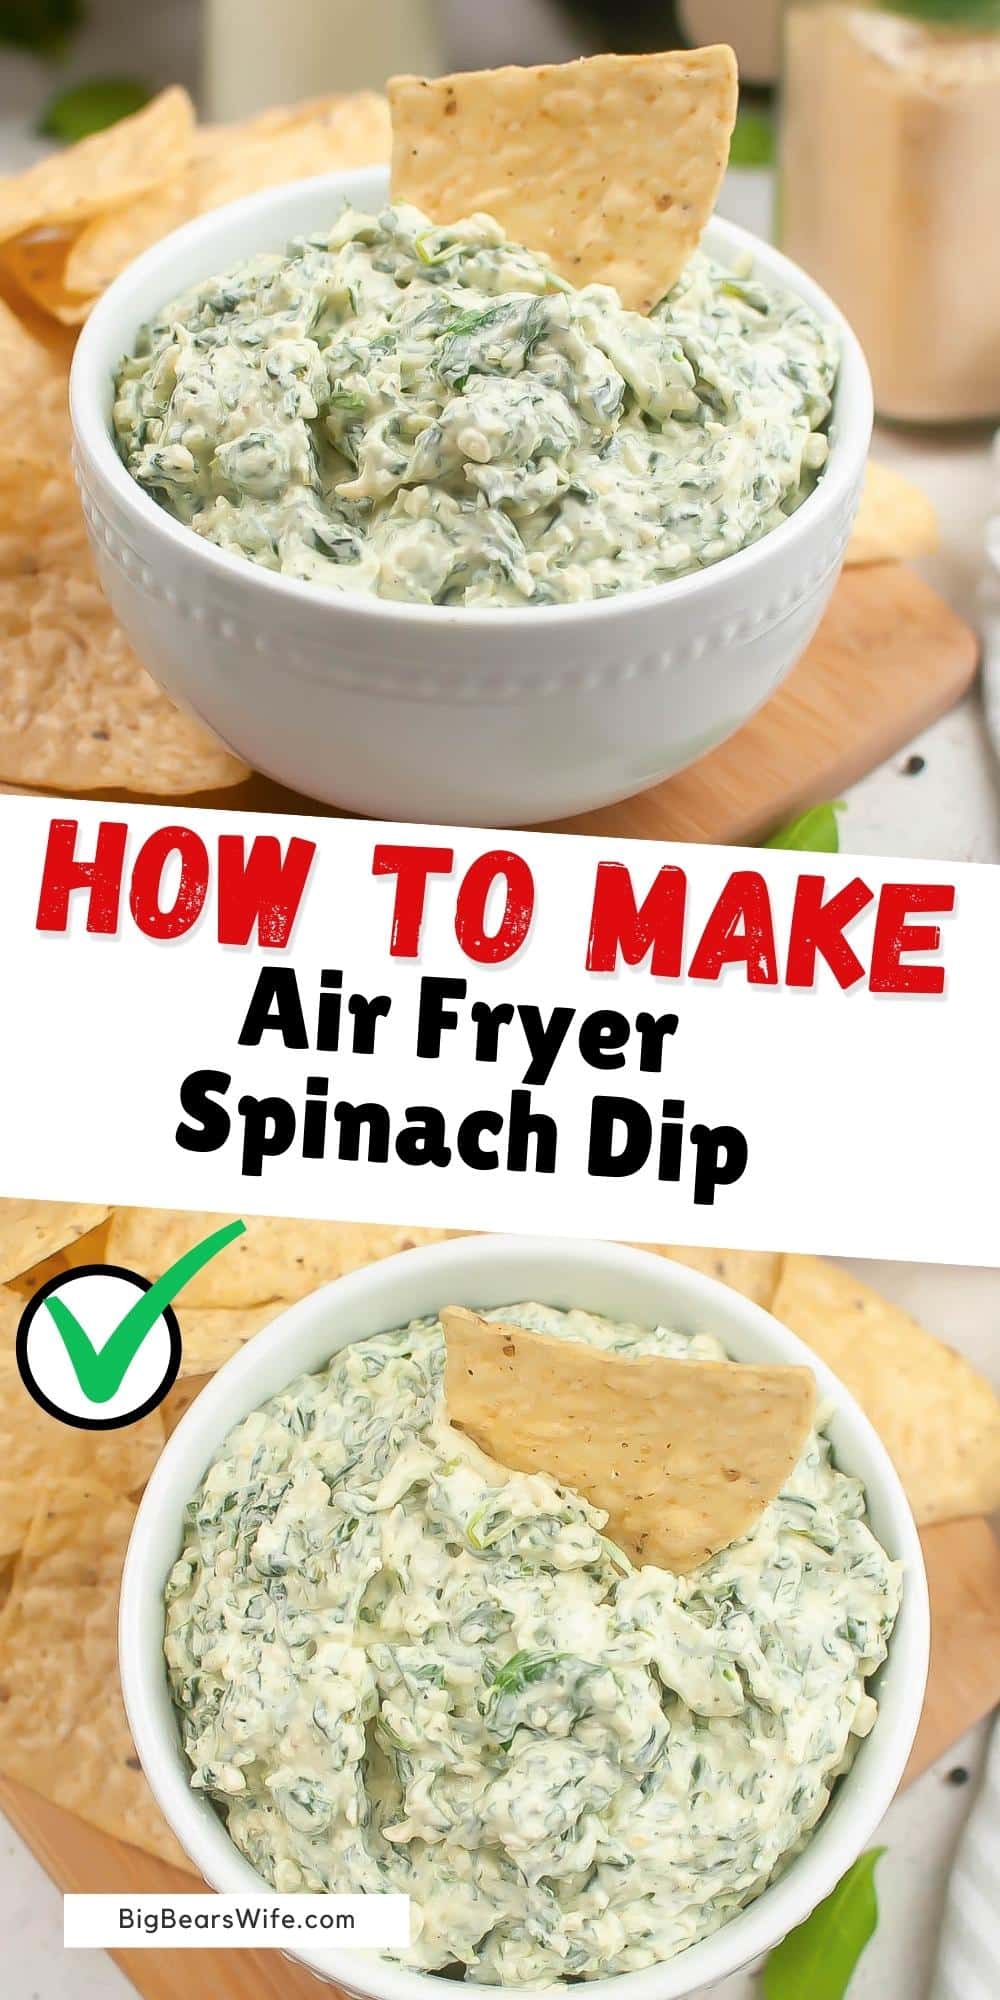 This tasty Air Fryer Spinach Dip is ready in under 20 minutes and not only perfect for an appetizer for dinner but it's great for any party or tailgate!  via @bigbearswife